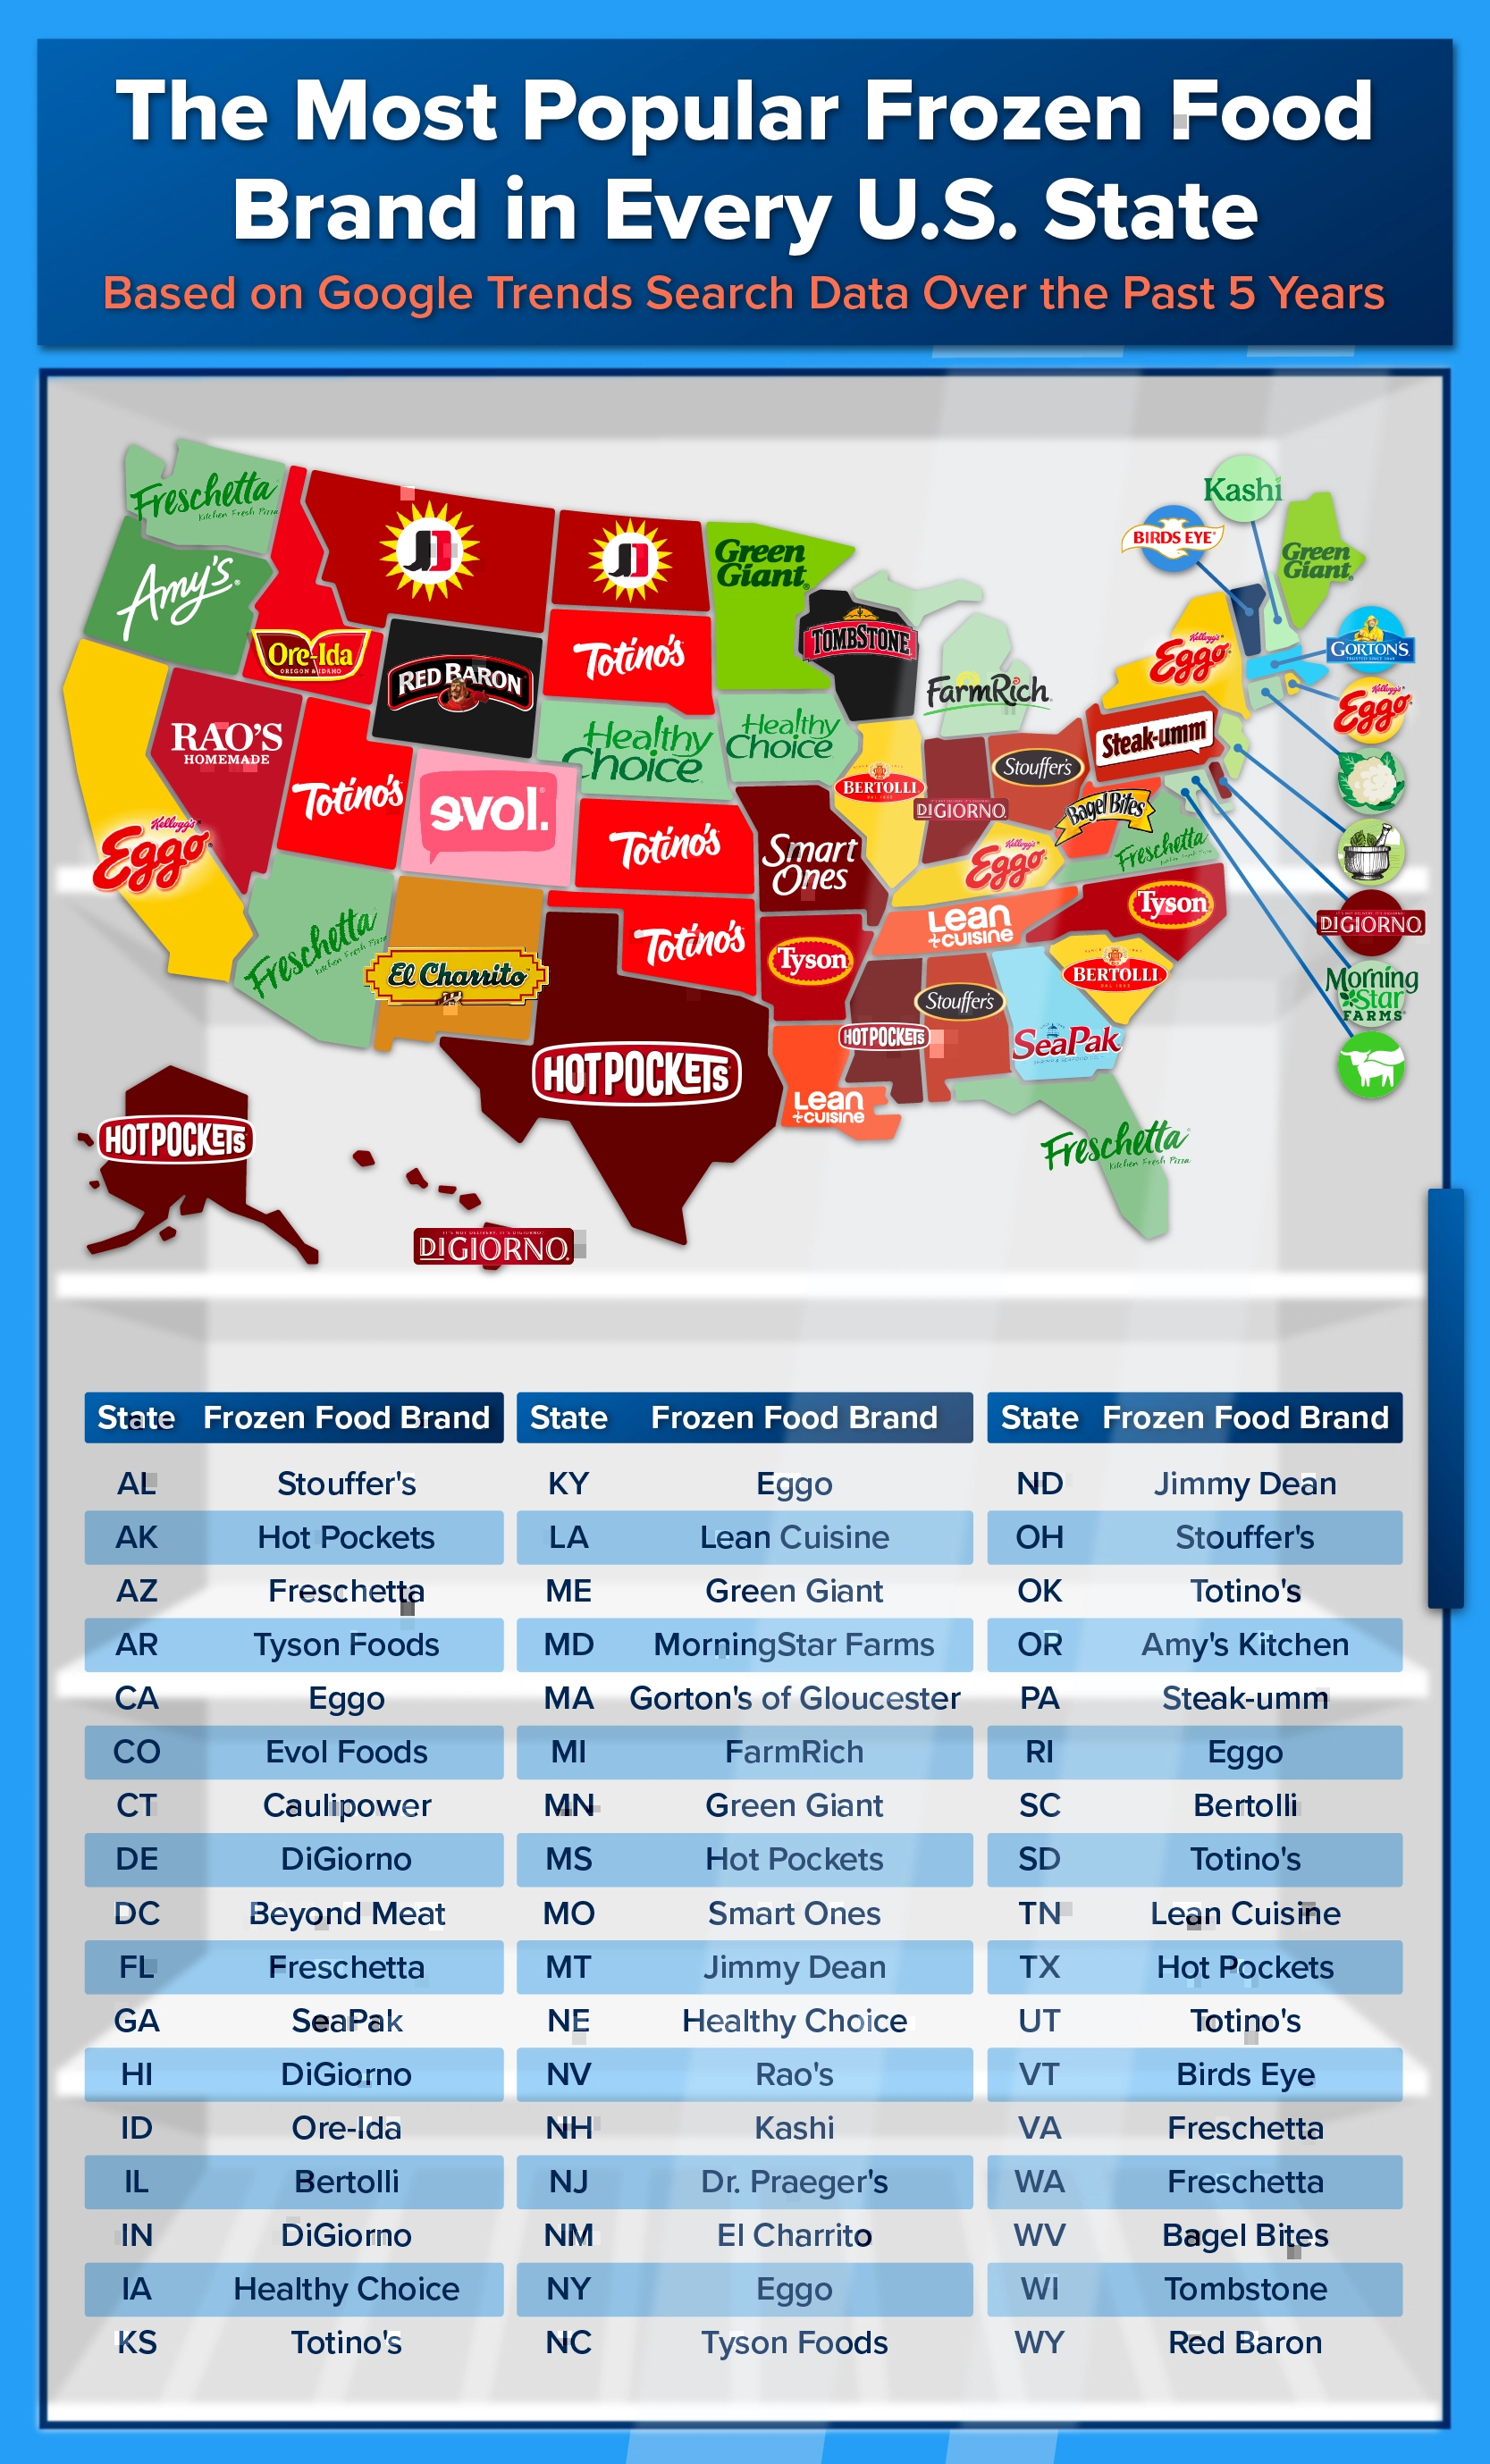 https://www.mrappliance.com/us/en-us/mr-appliance/_assets/expert-tips/images/mra-blog-an-infographic-showing-the-most-popular-frozen-dessert-brand-in-every-state.webp